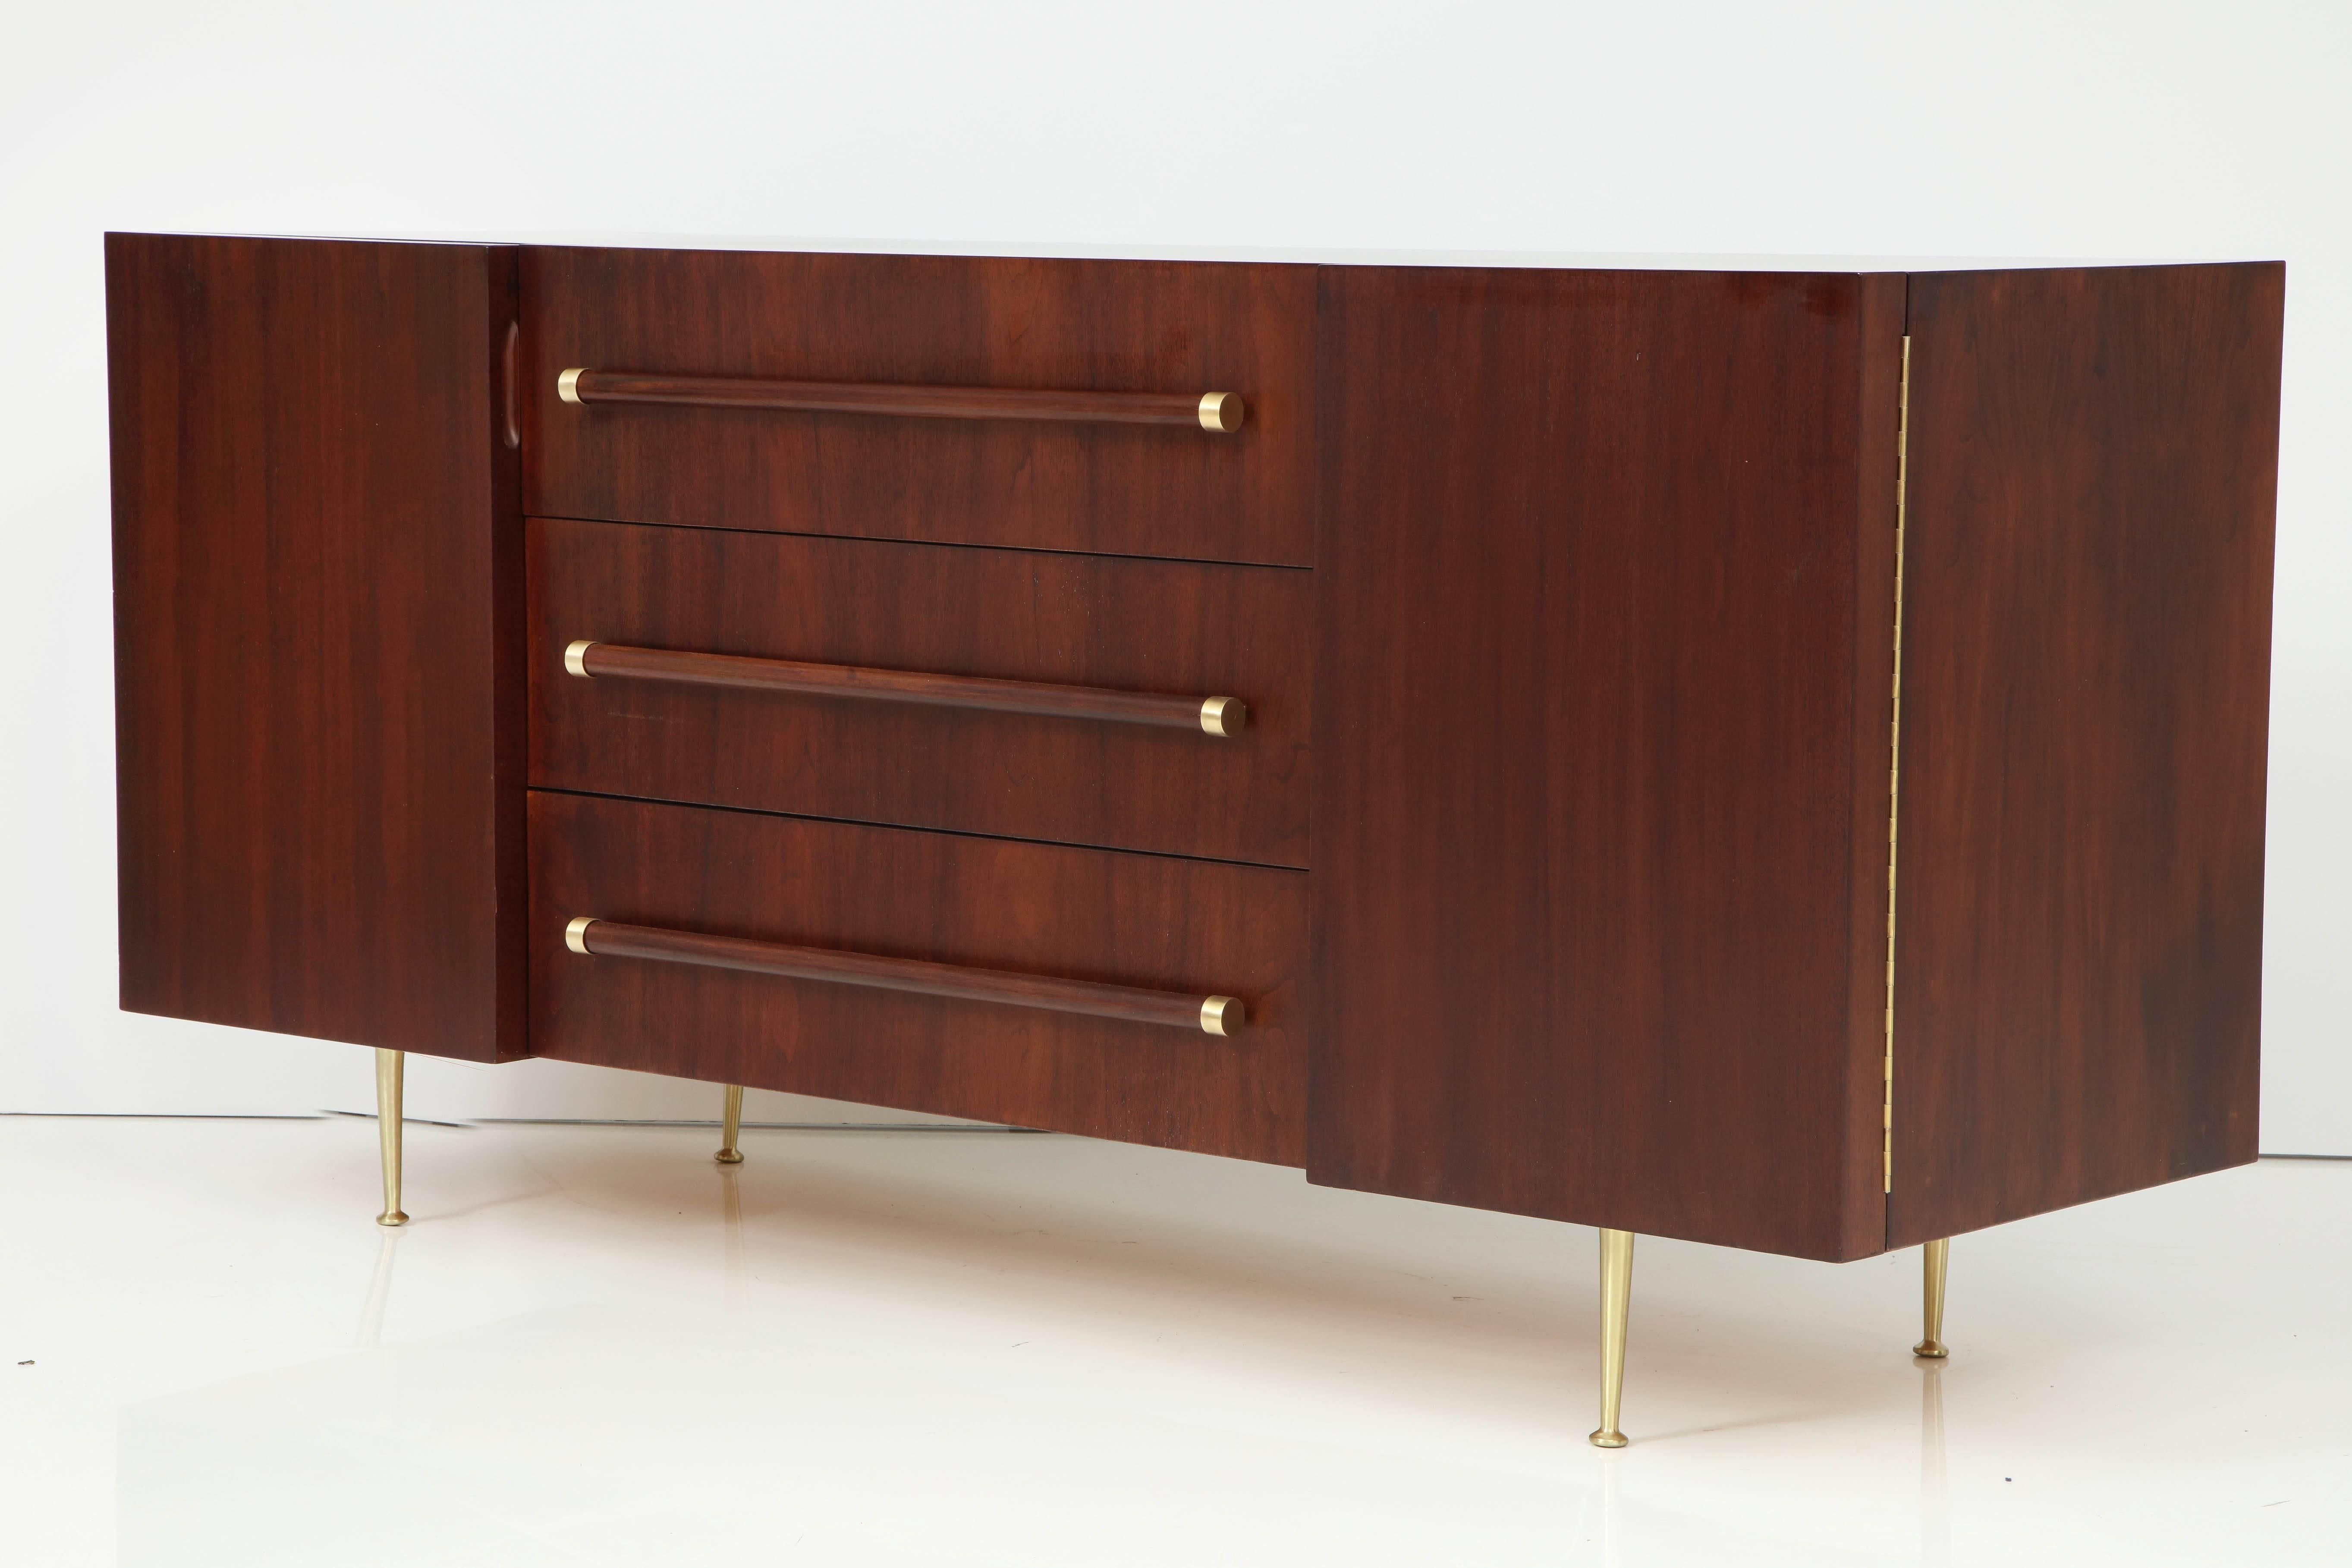 Midcentury classic sideboard/server with a medium brown stained walnut case, three drawers with walnut dowel pulls with brass end caps and two side compartments each concealing an adjustable shelf, satin brass legs finish off the piece. Mint